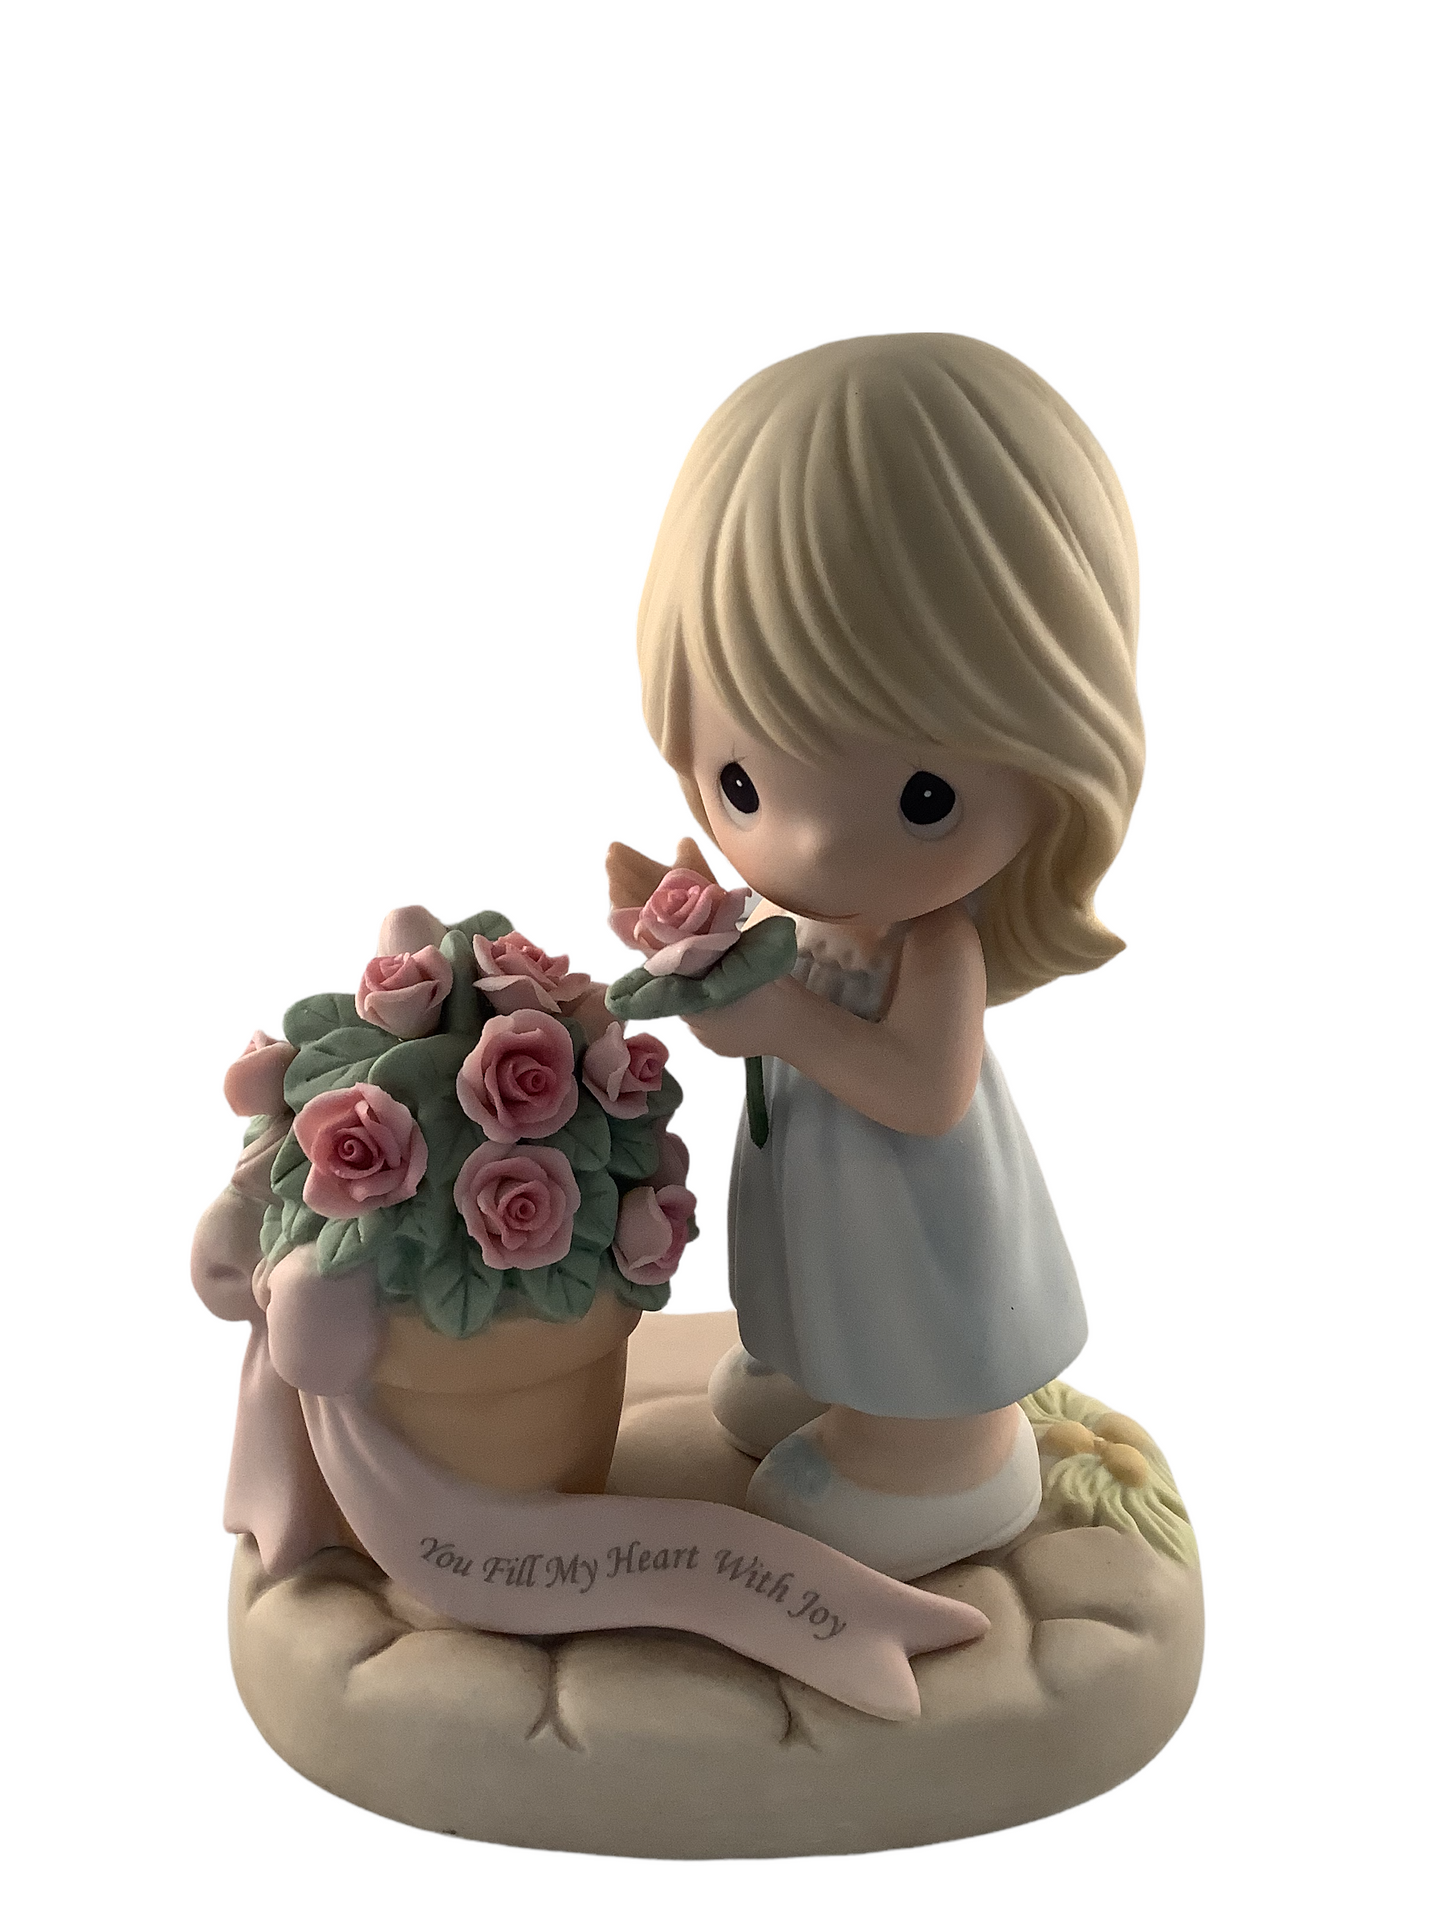 You Fill My Heart With Joy - Precious Moment Figurine